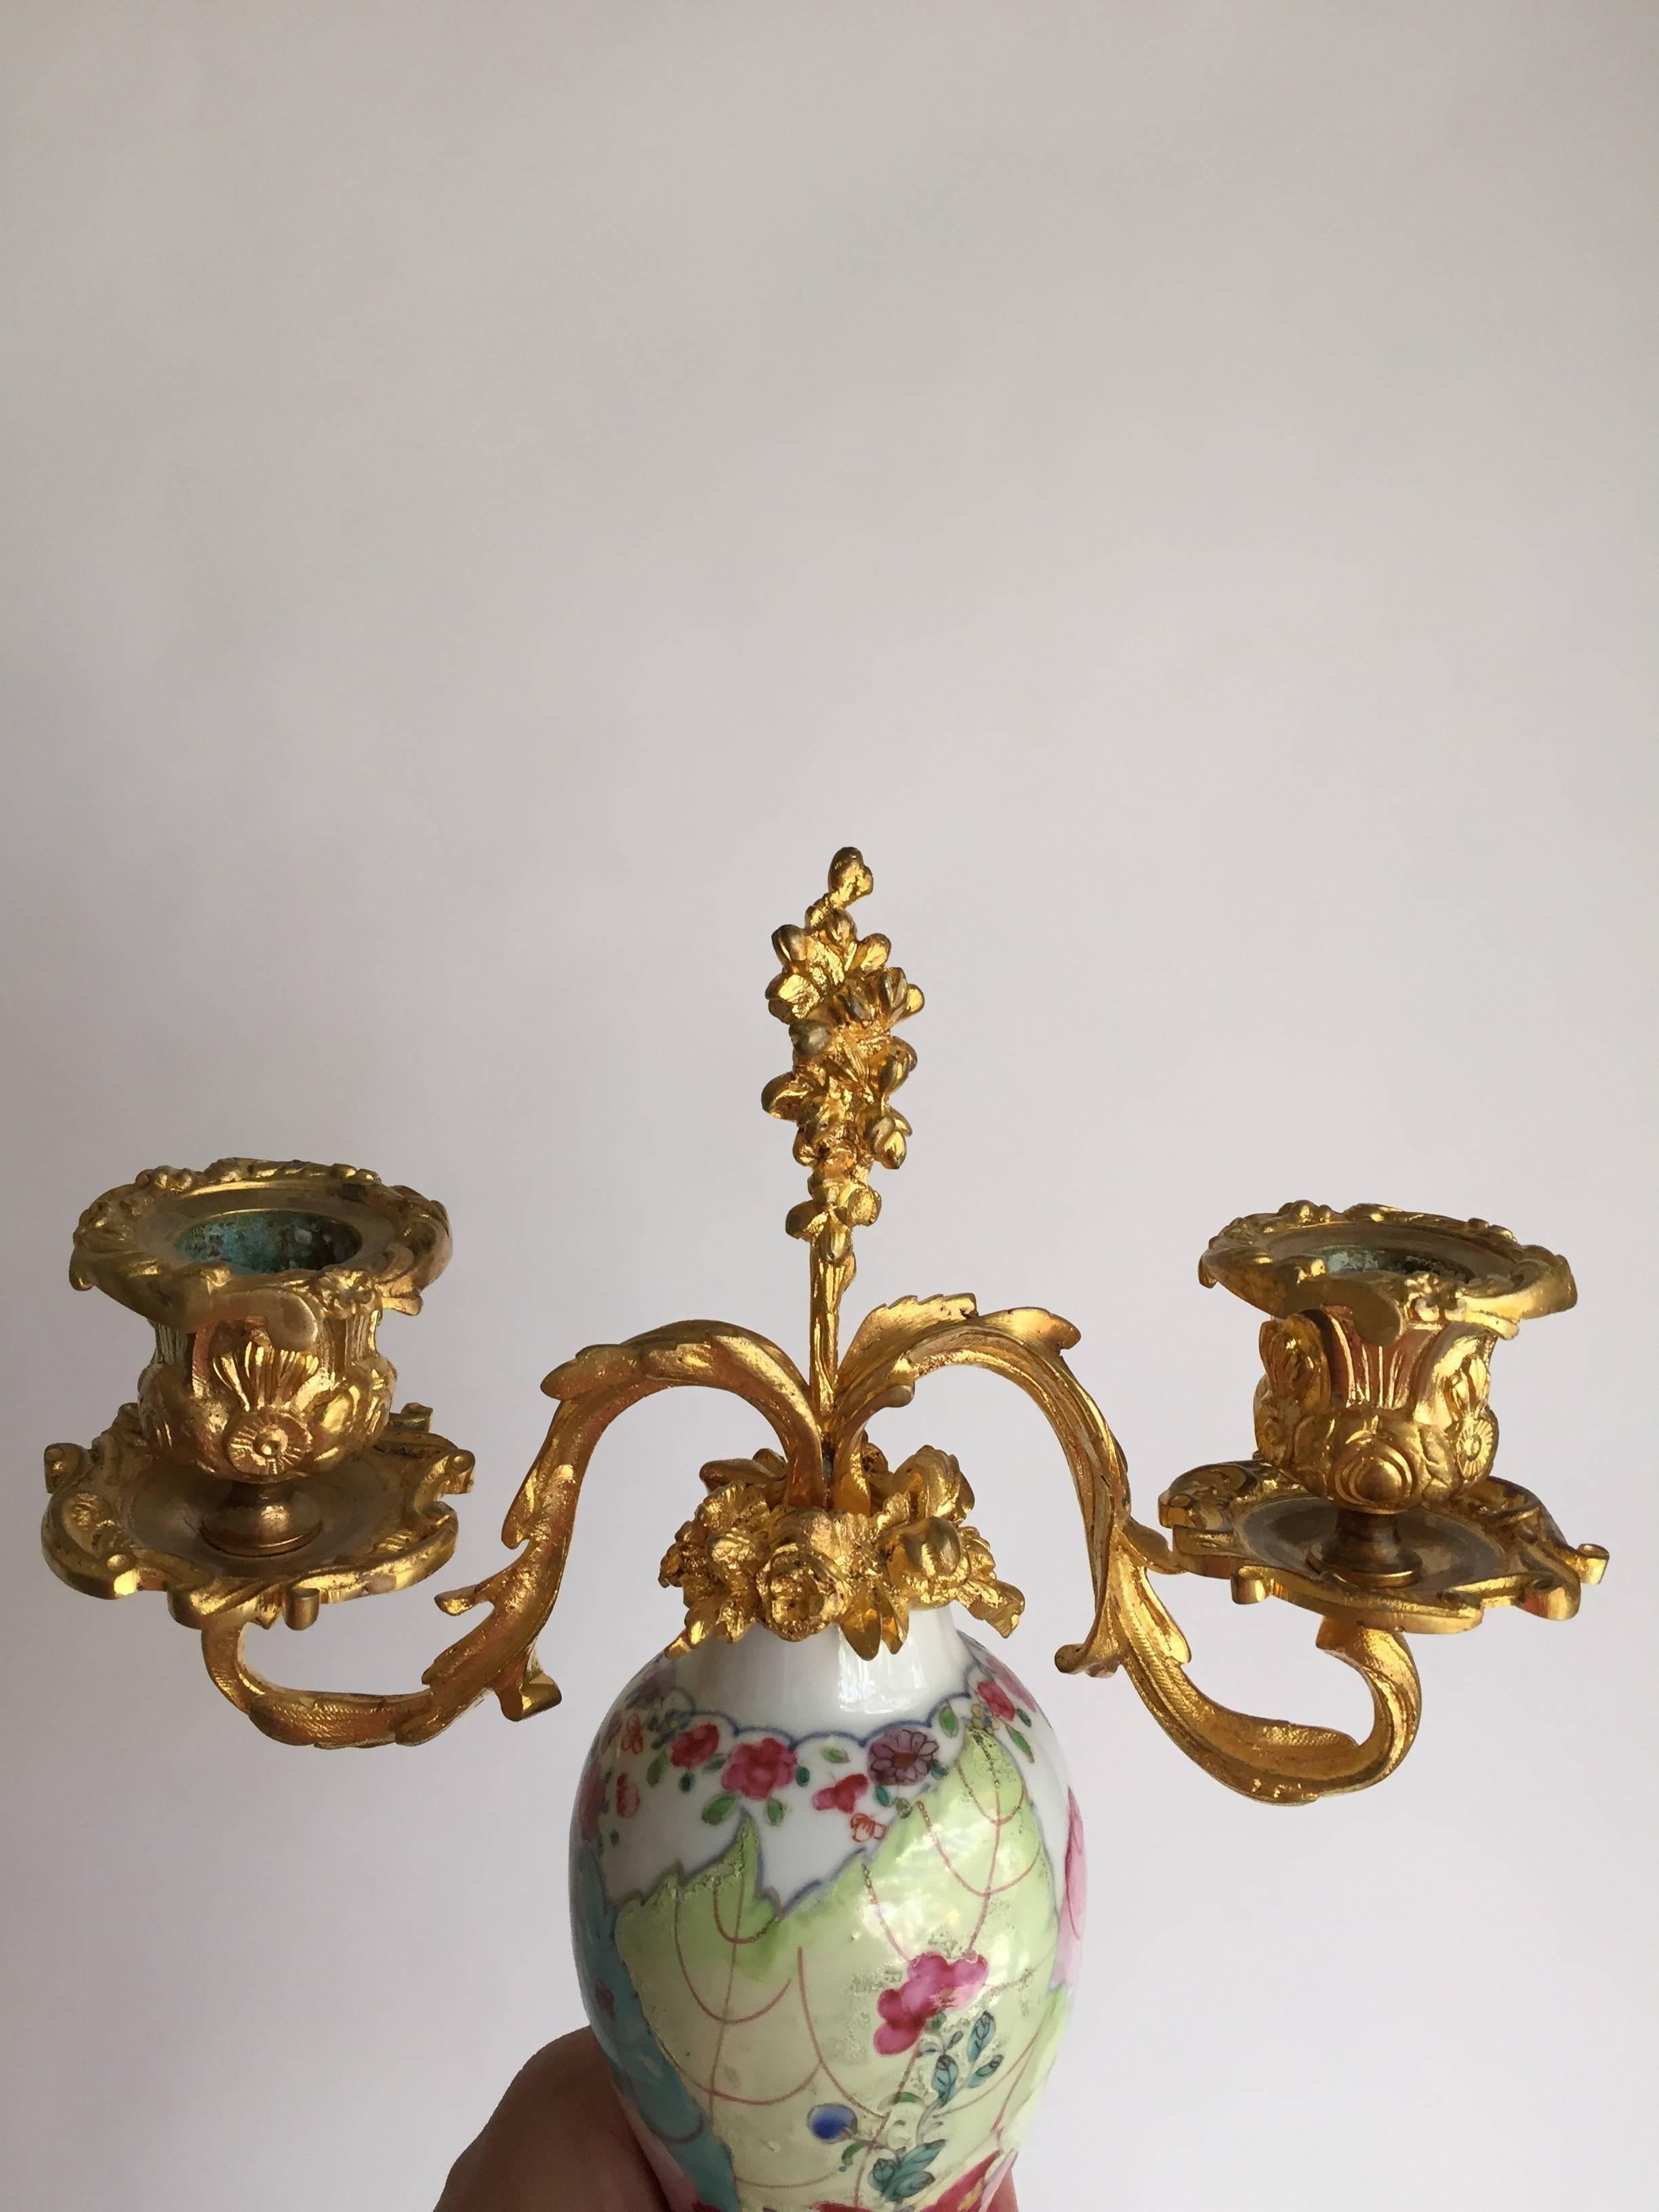 Enameled Chinese Export Porcelain and Ormolu-Mounted Two-Arm Candelabra For Sale